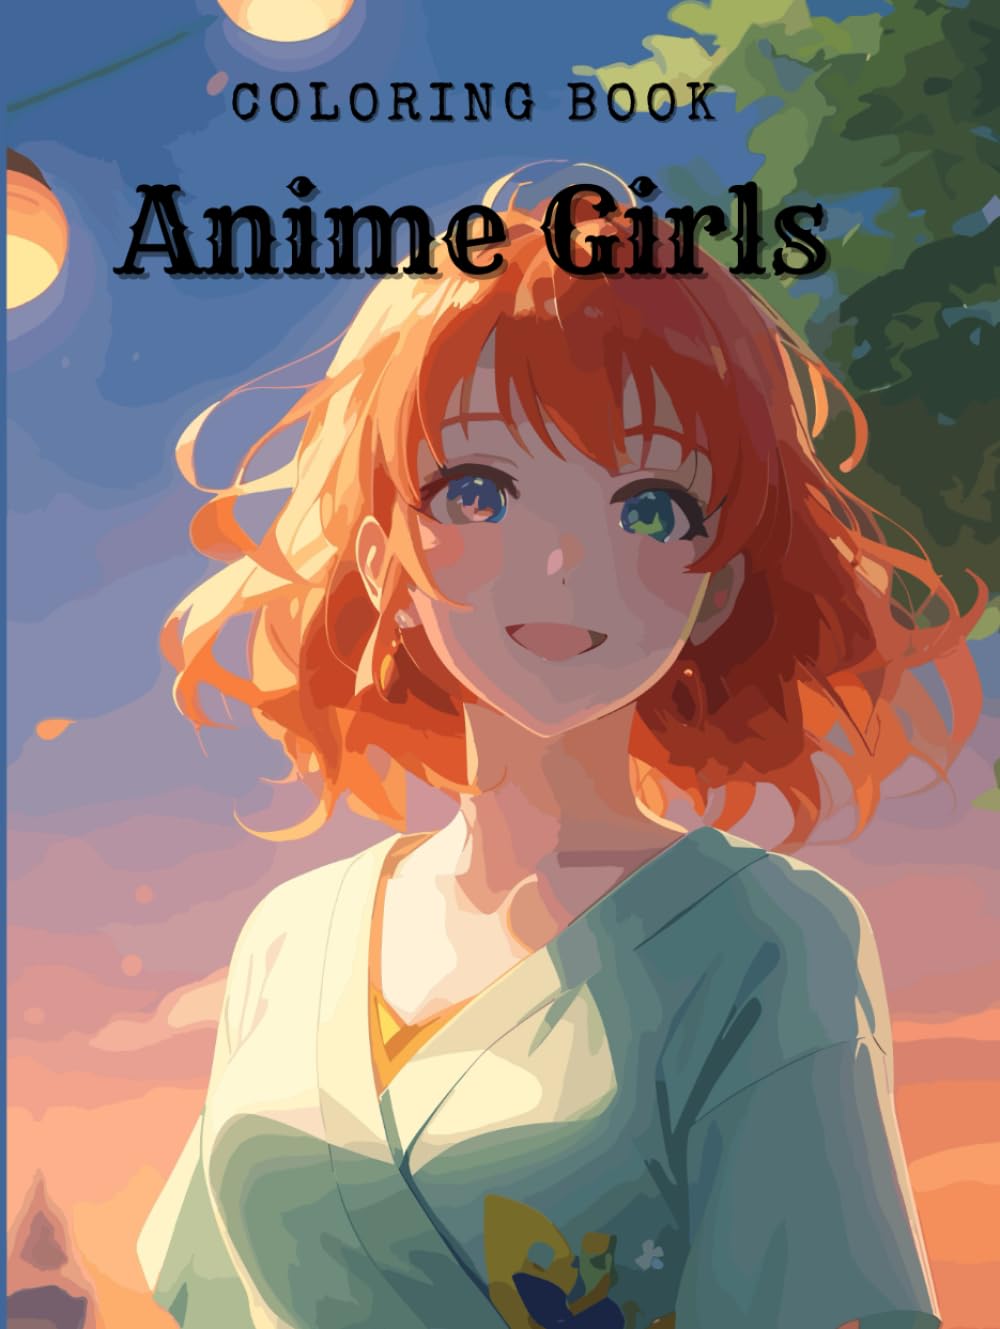 Anime Girls Coloring Book: A Vibrant World of Manga Art: Unlock Your Inner Artist with 40 Exquisite Manga Girl Illustrations to Color and Explore, Hardcover